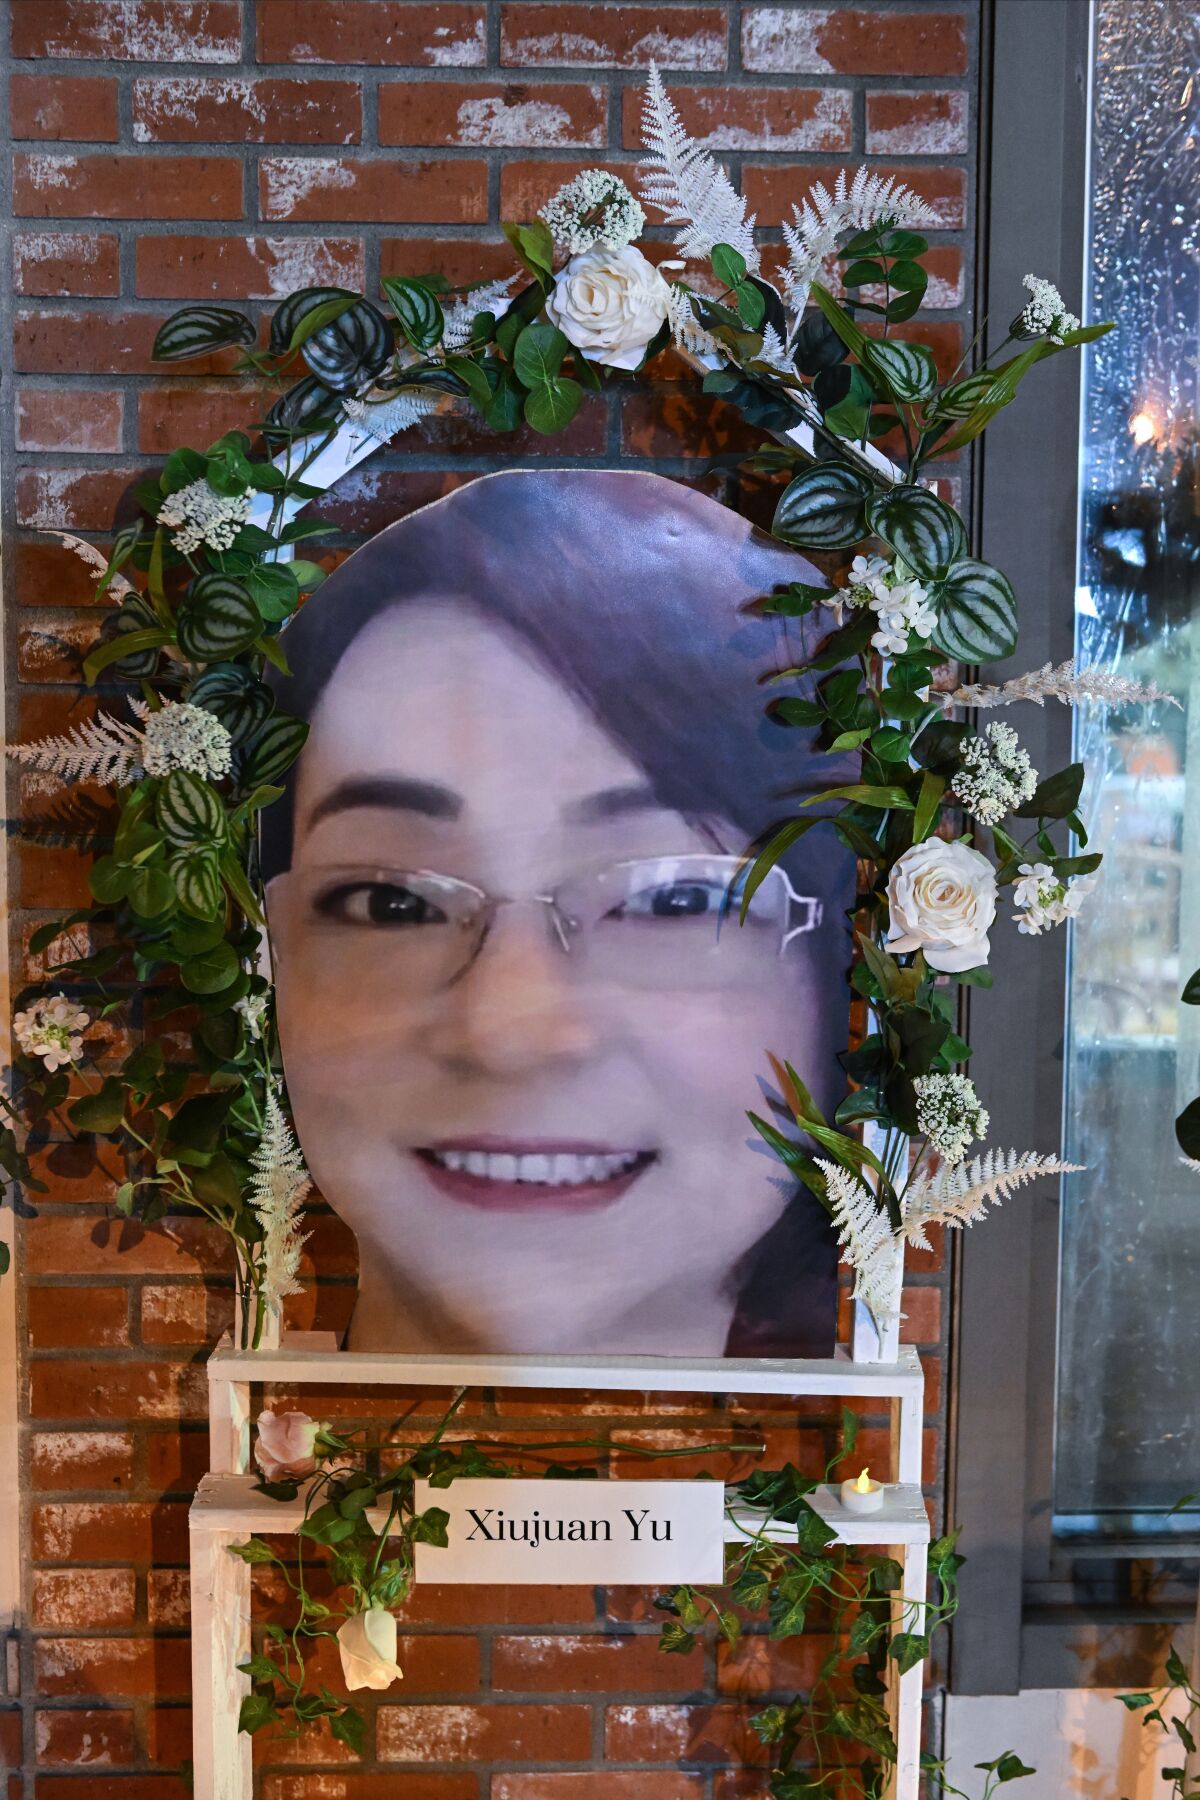 Flowers surround a large portrait of a smiling woman mounted against a brick wall